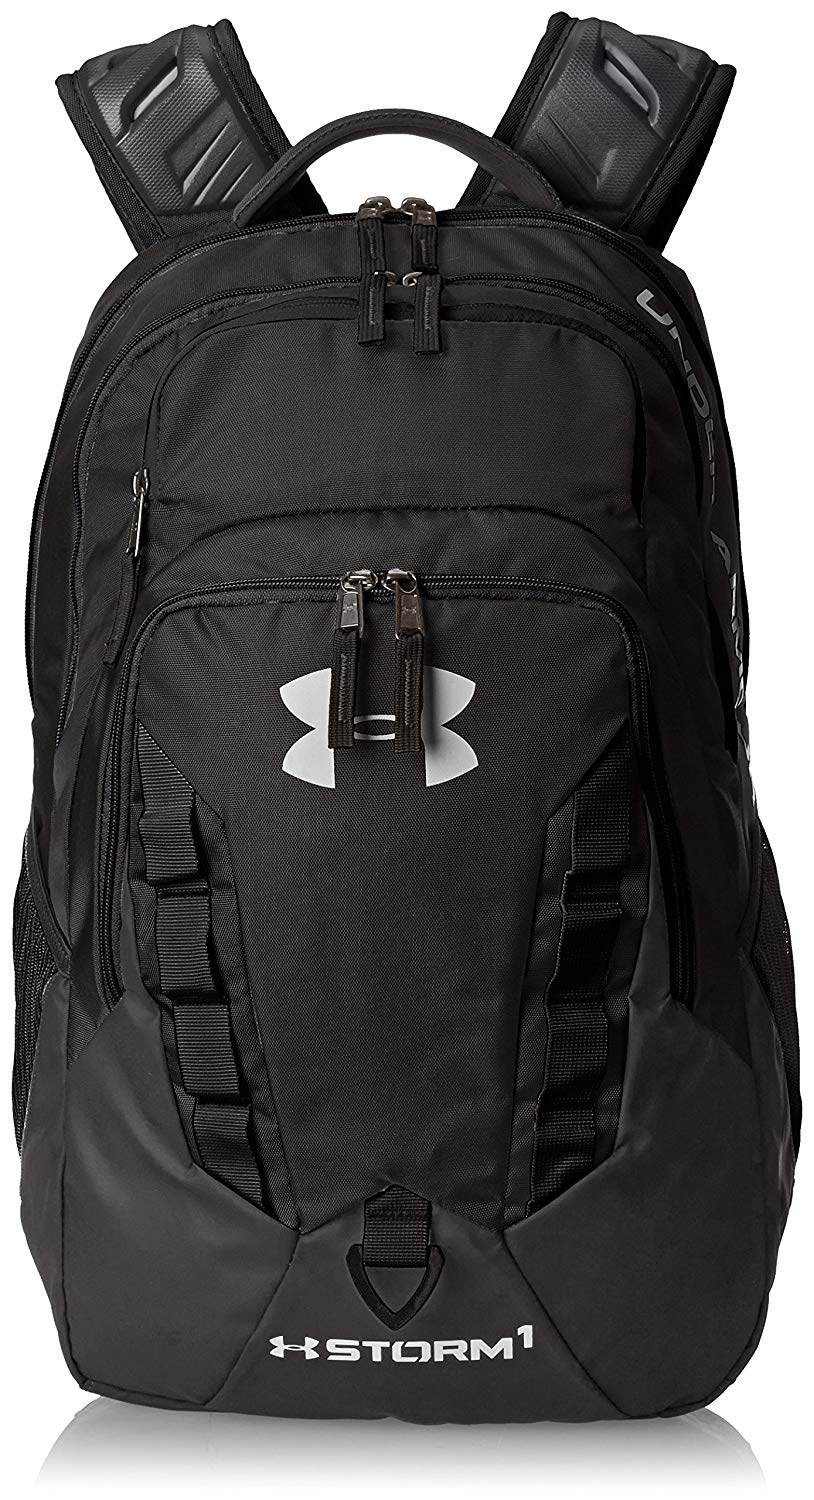 Under Armour - Unisex Storm Backpack